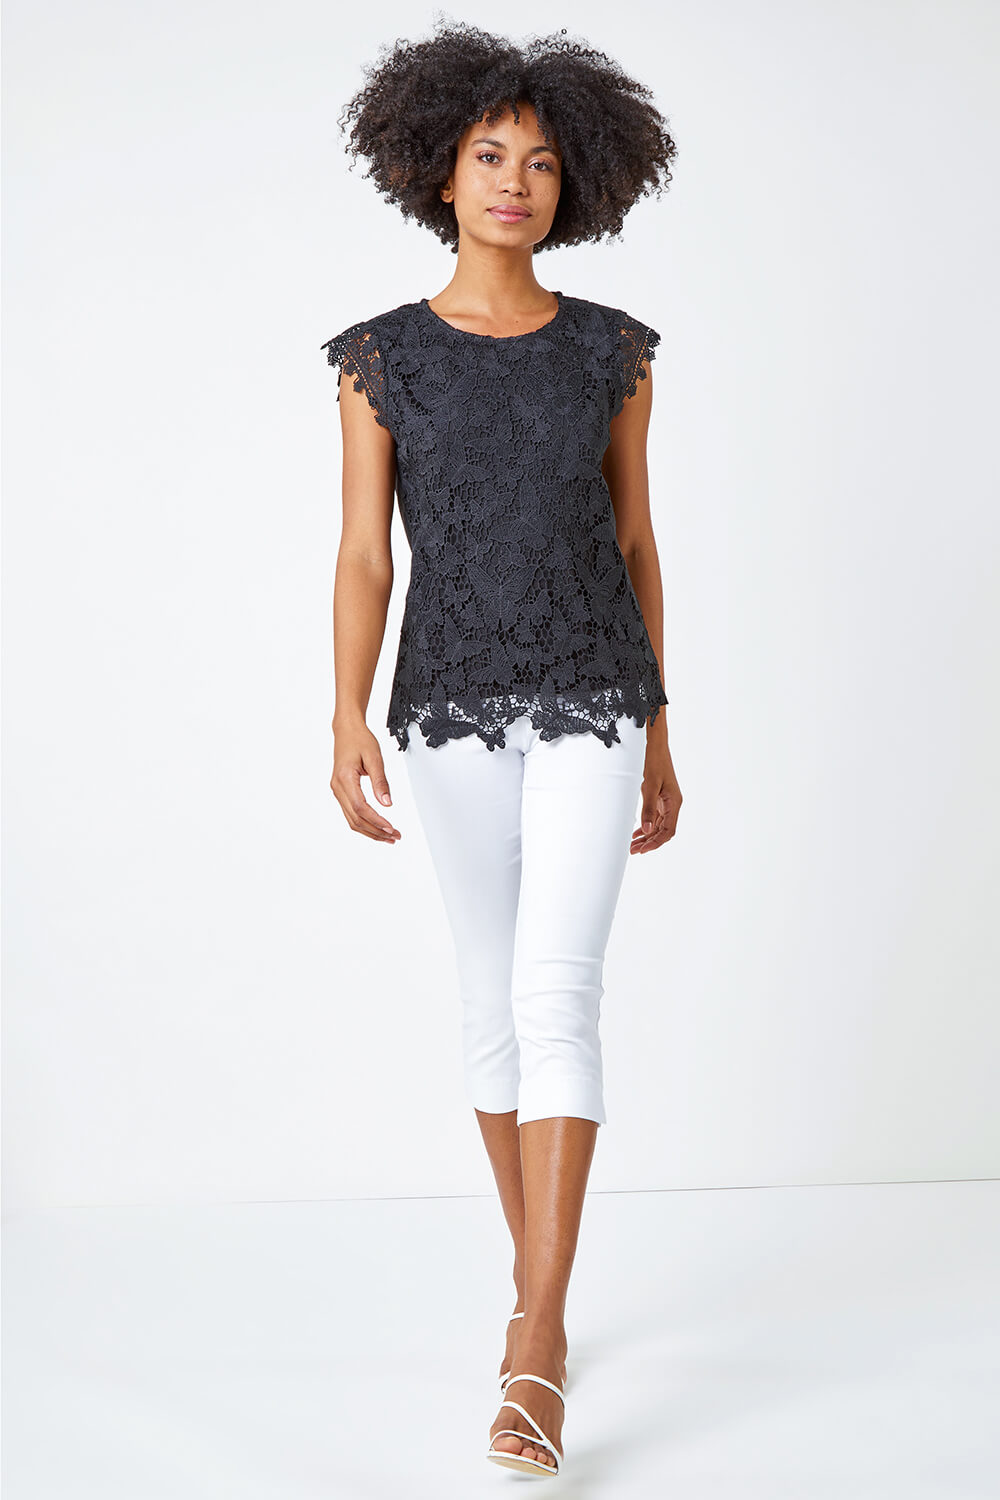 Black Butterfly Lace Stretch Top, Image 2 of 5